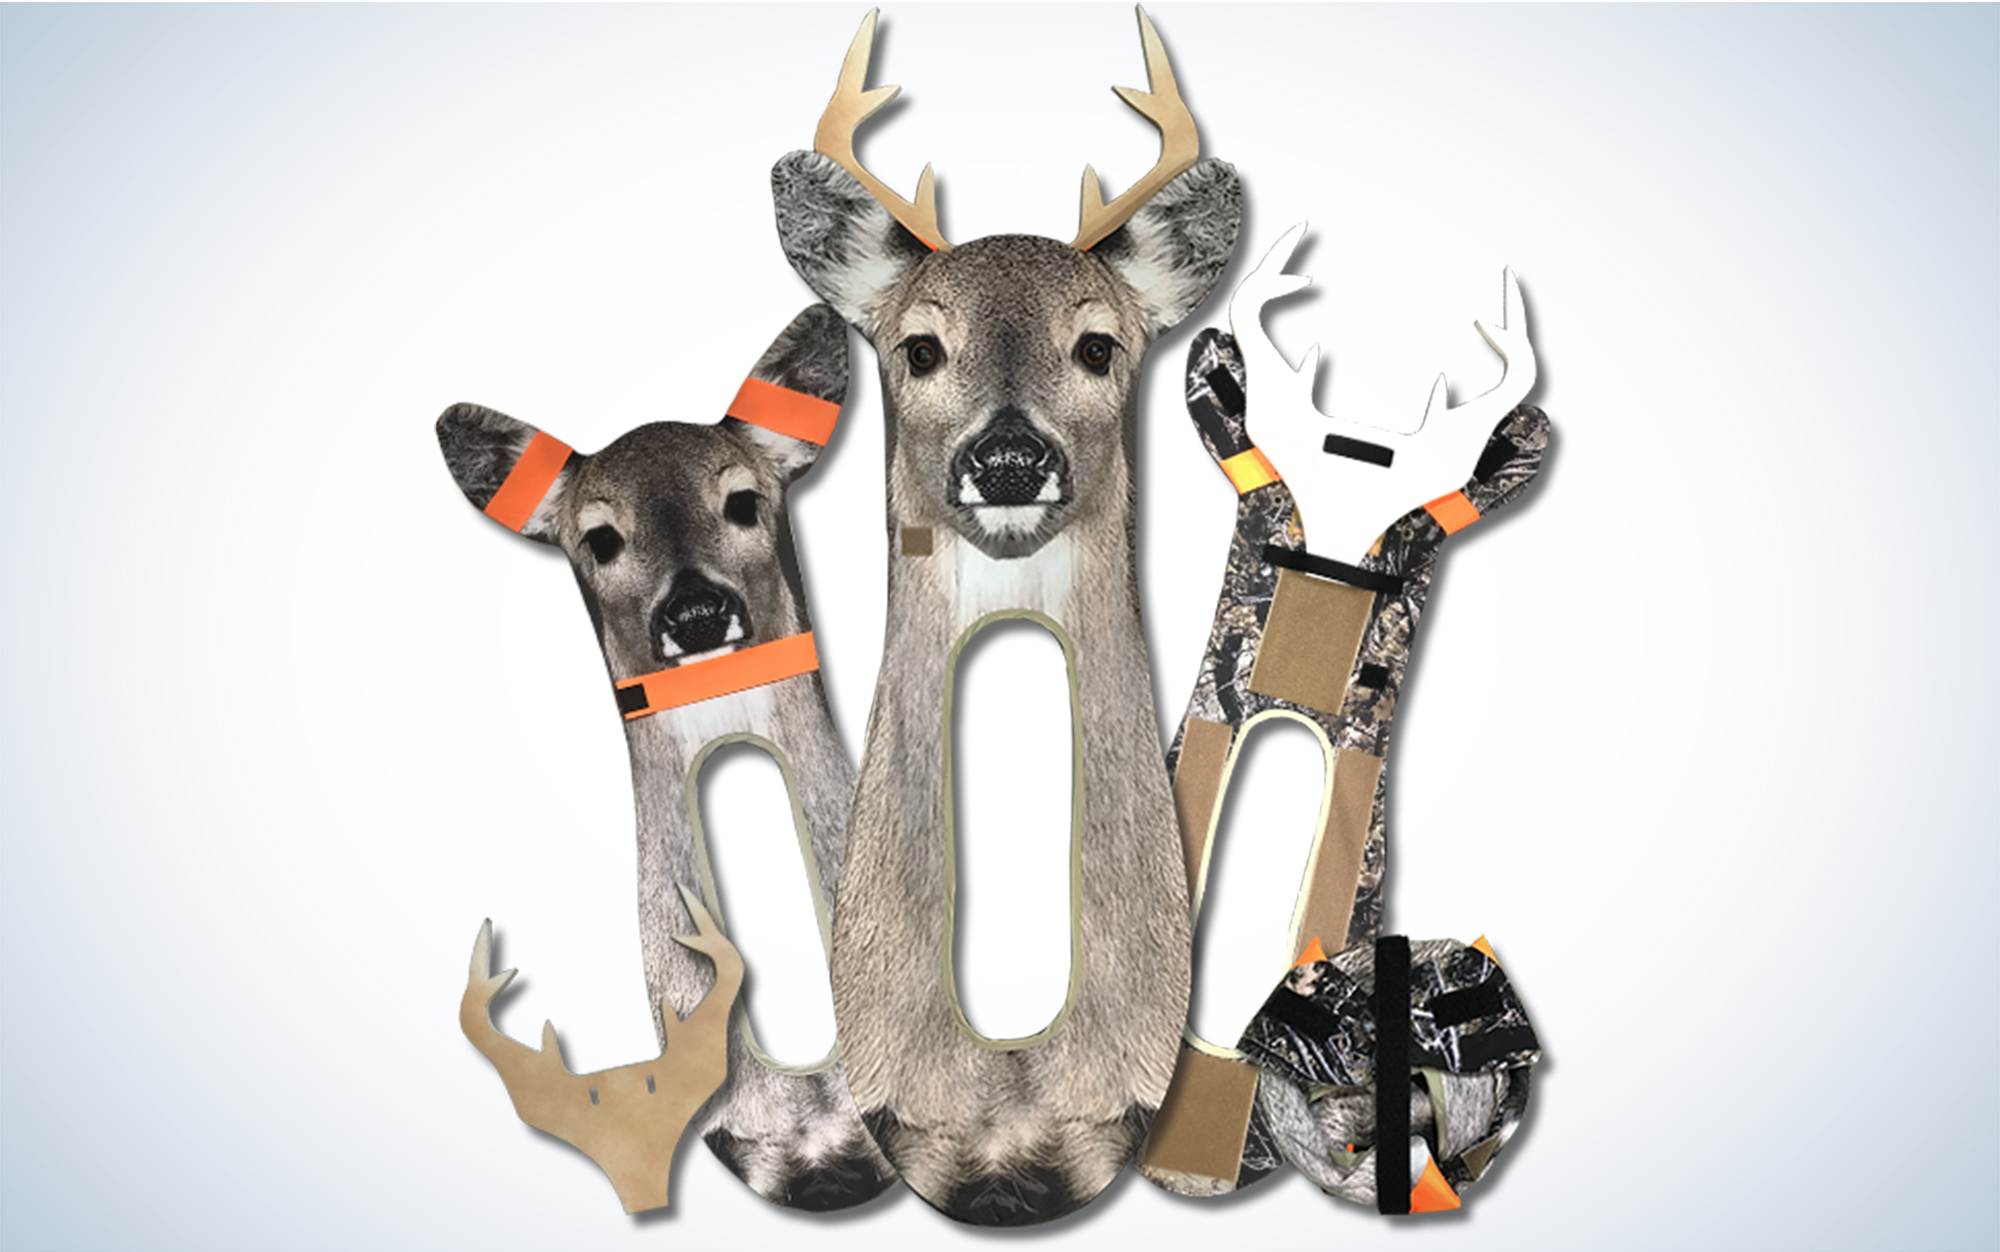 The Ultimate Predator Whitetail Stalker Decoy is the best for spot and stalk.